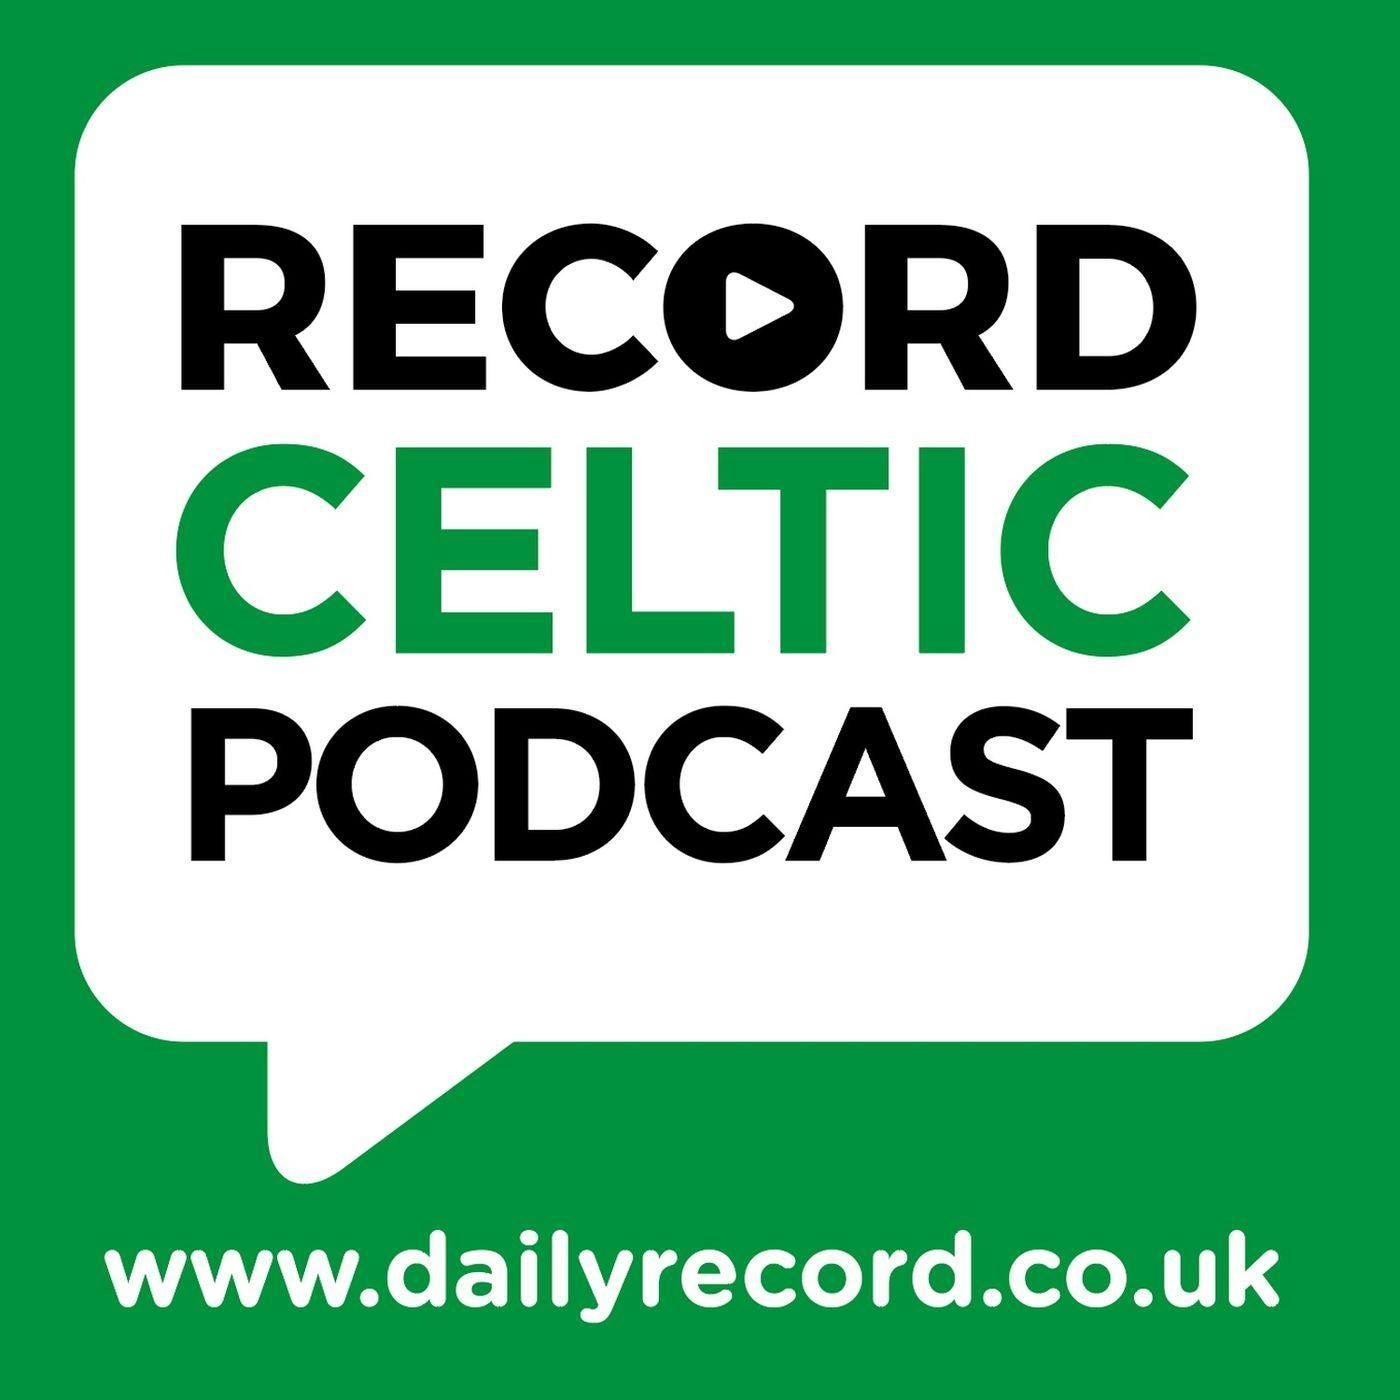 Celtic’s Dubai ’omnishambles’ dissected | Andy Walker’s no holds barred verdict | The recruitment mistakes that MUST be corrected